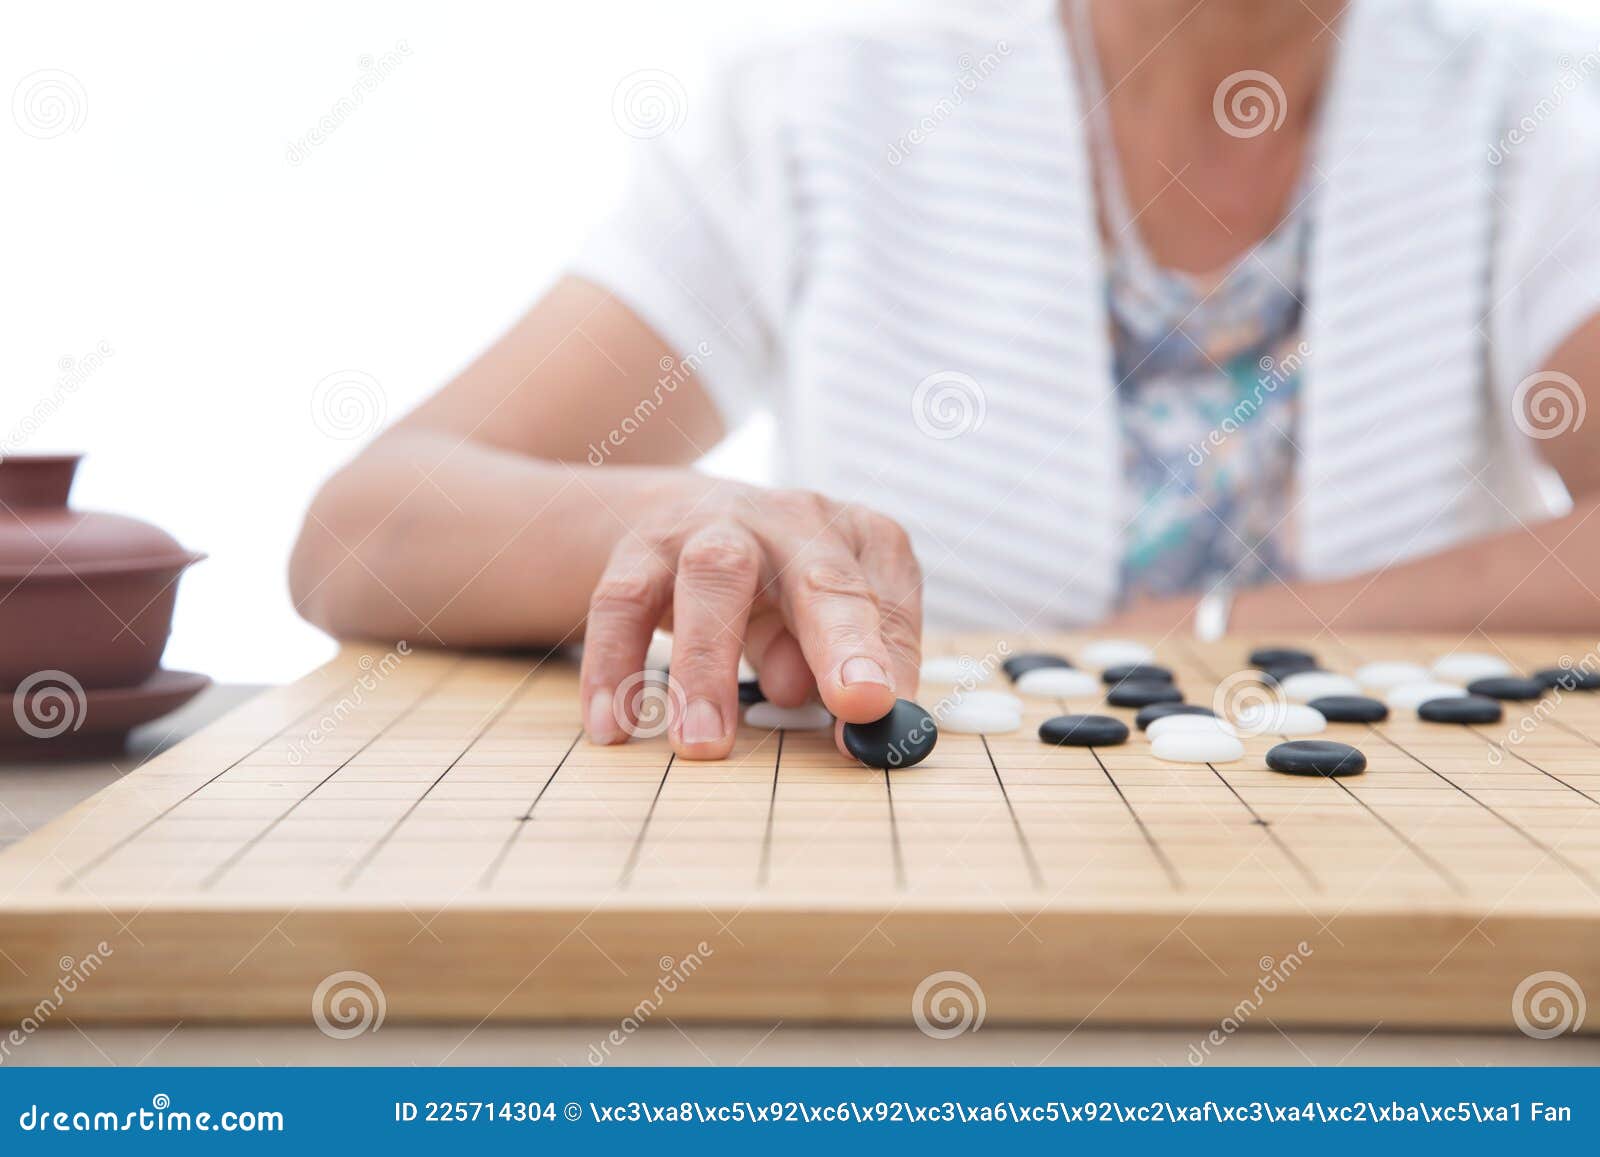 Oude Dame Speelt Chinese Stock Foto Image of schaak: 225714304